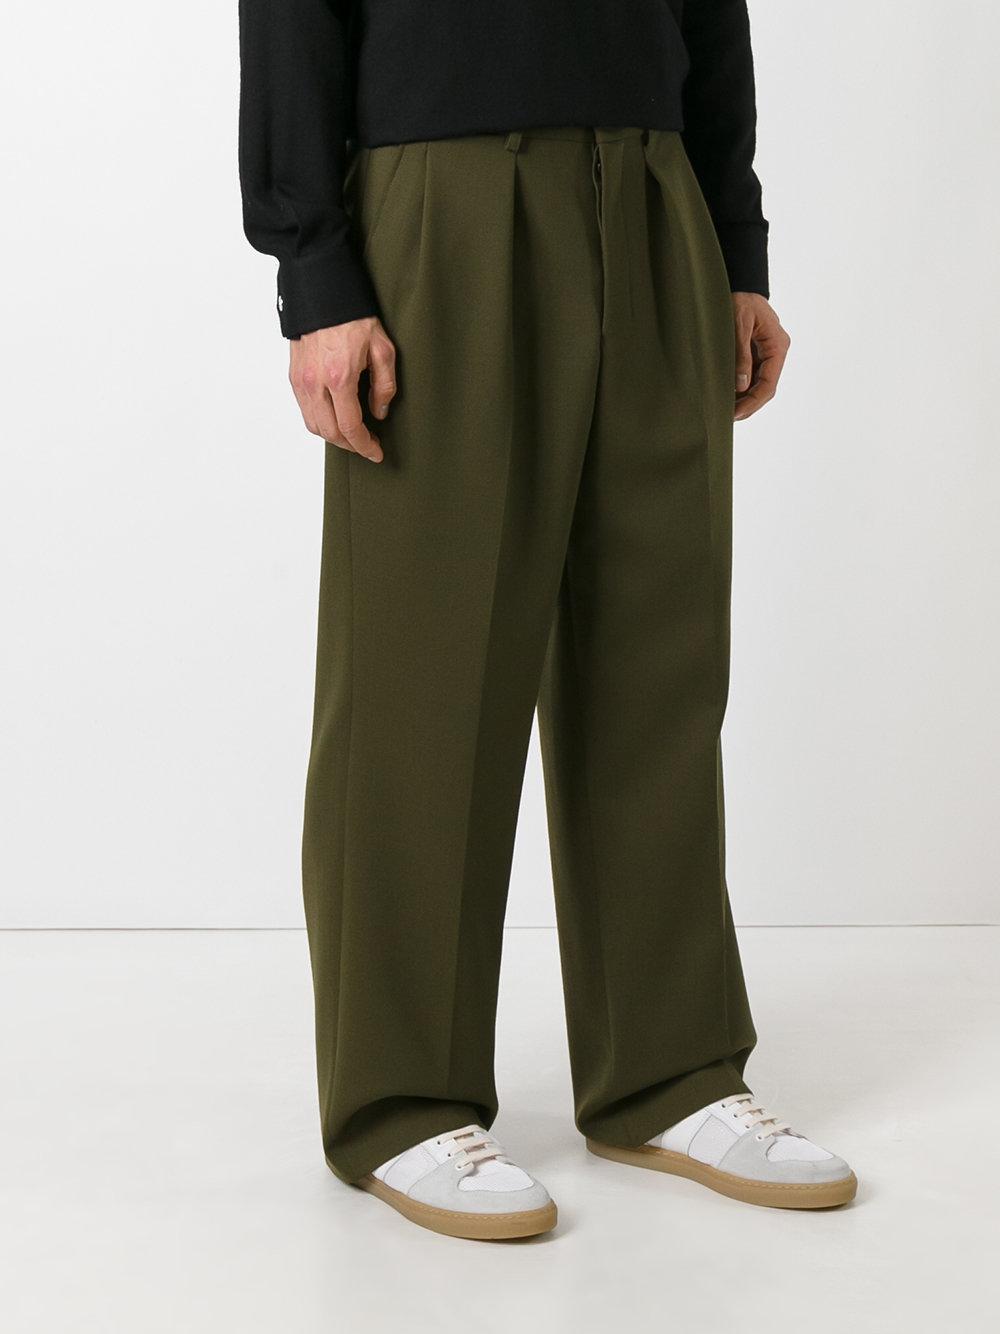 AMI Wool Box Pleated Wide Trousers in Green for Men - Lyst